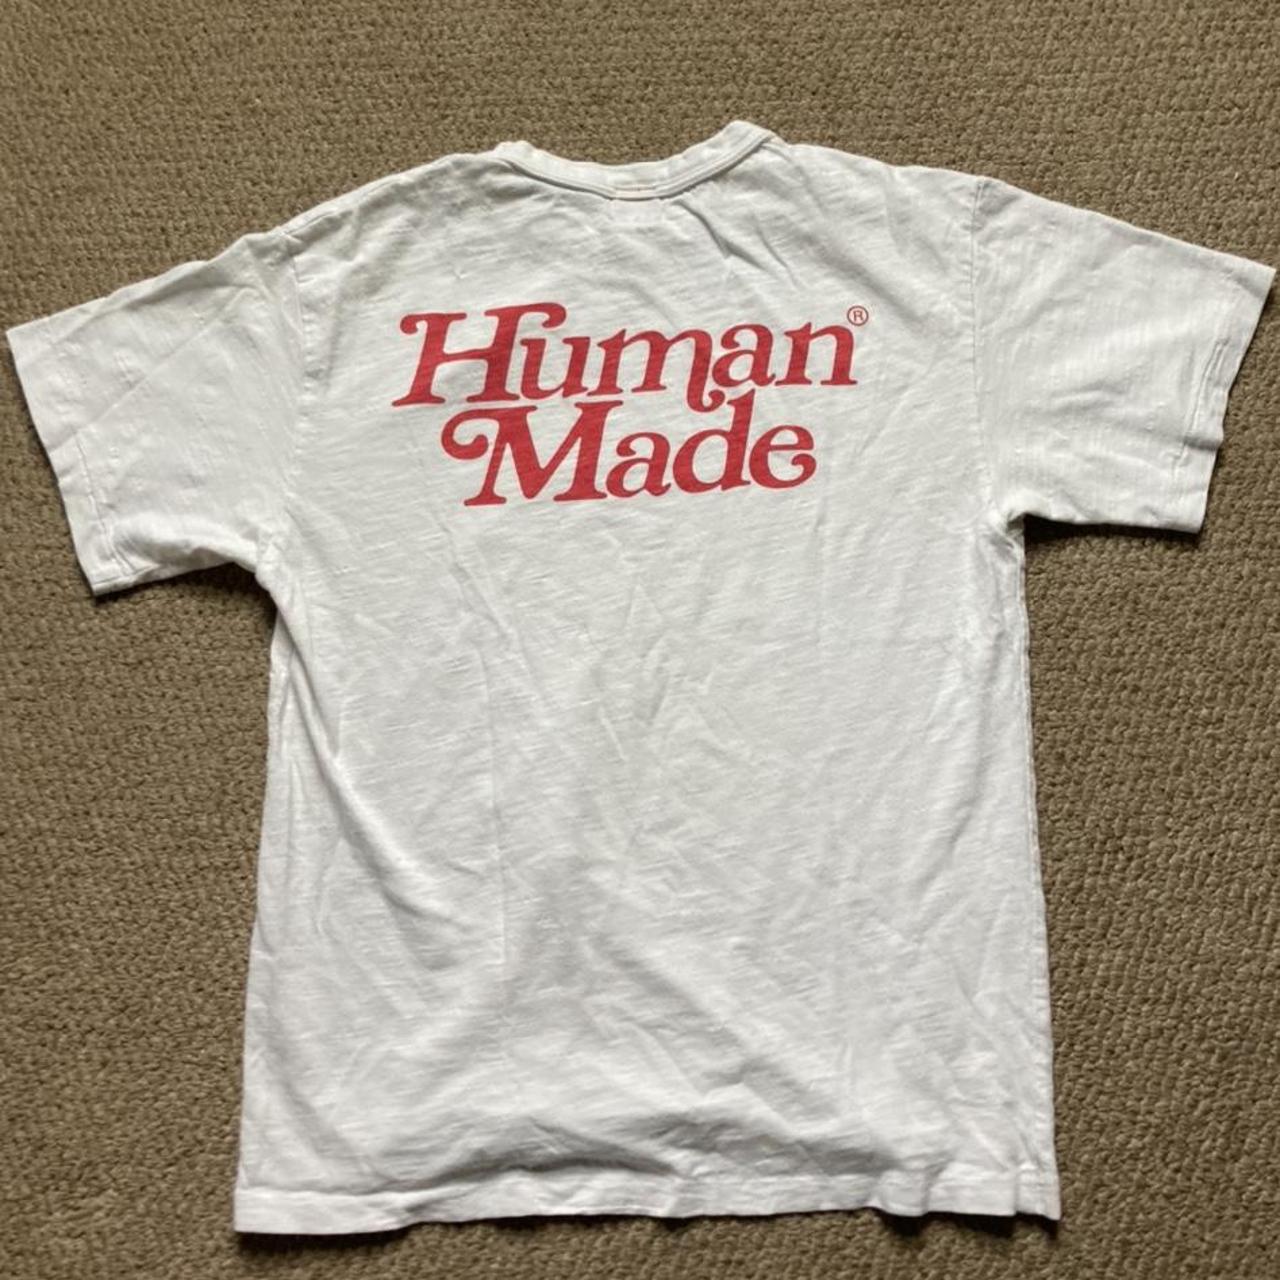 Human Made Men's White and Red T-shirt